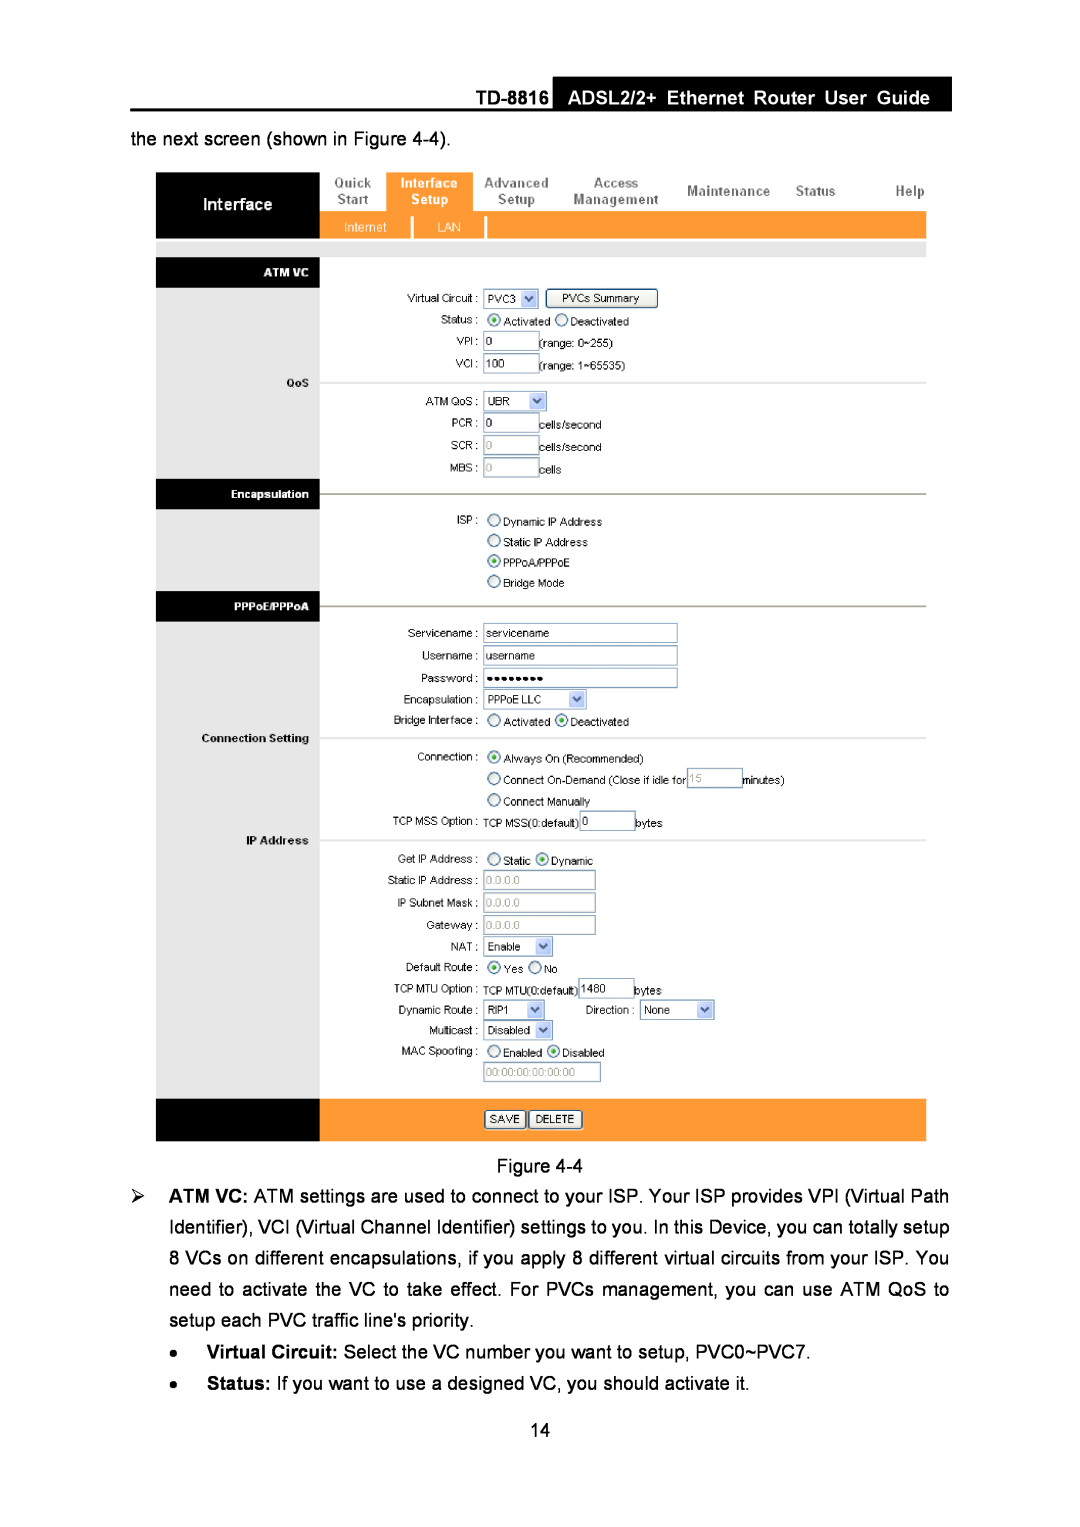 TP-Link TD-8816 manual ADSL2/2+ Ethernet Router User Guide, the next screen shown in Figure 